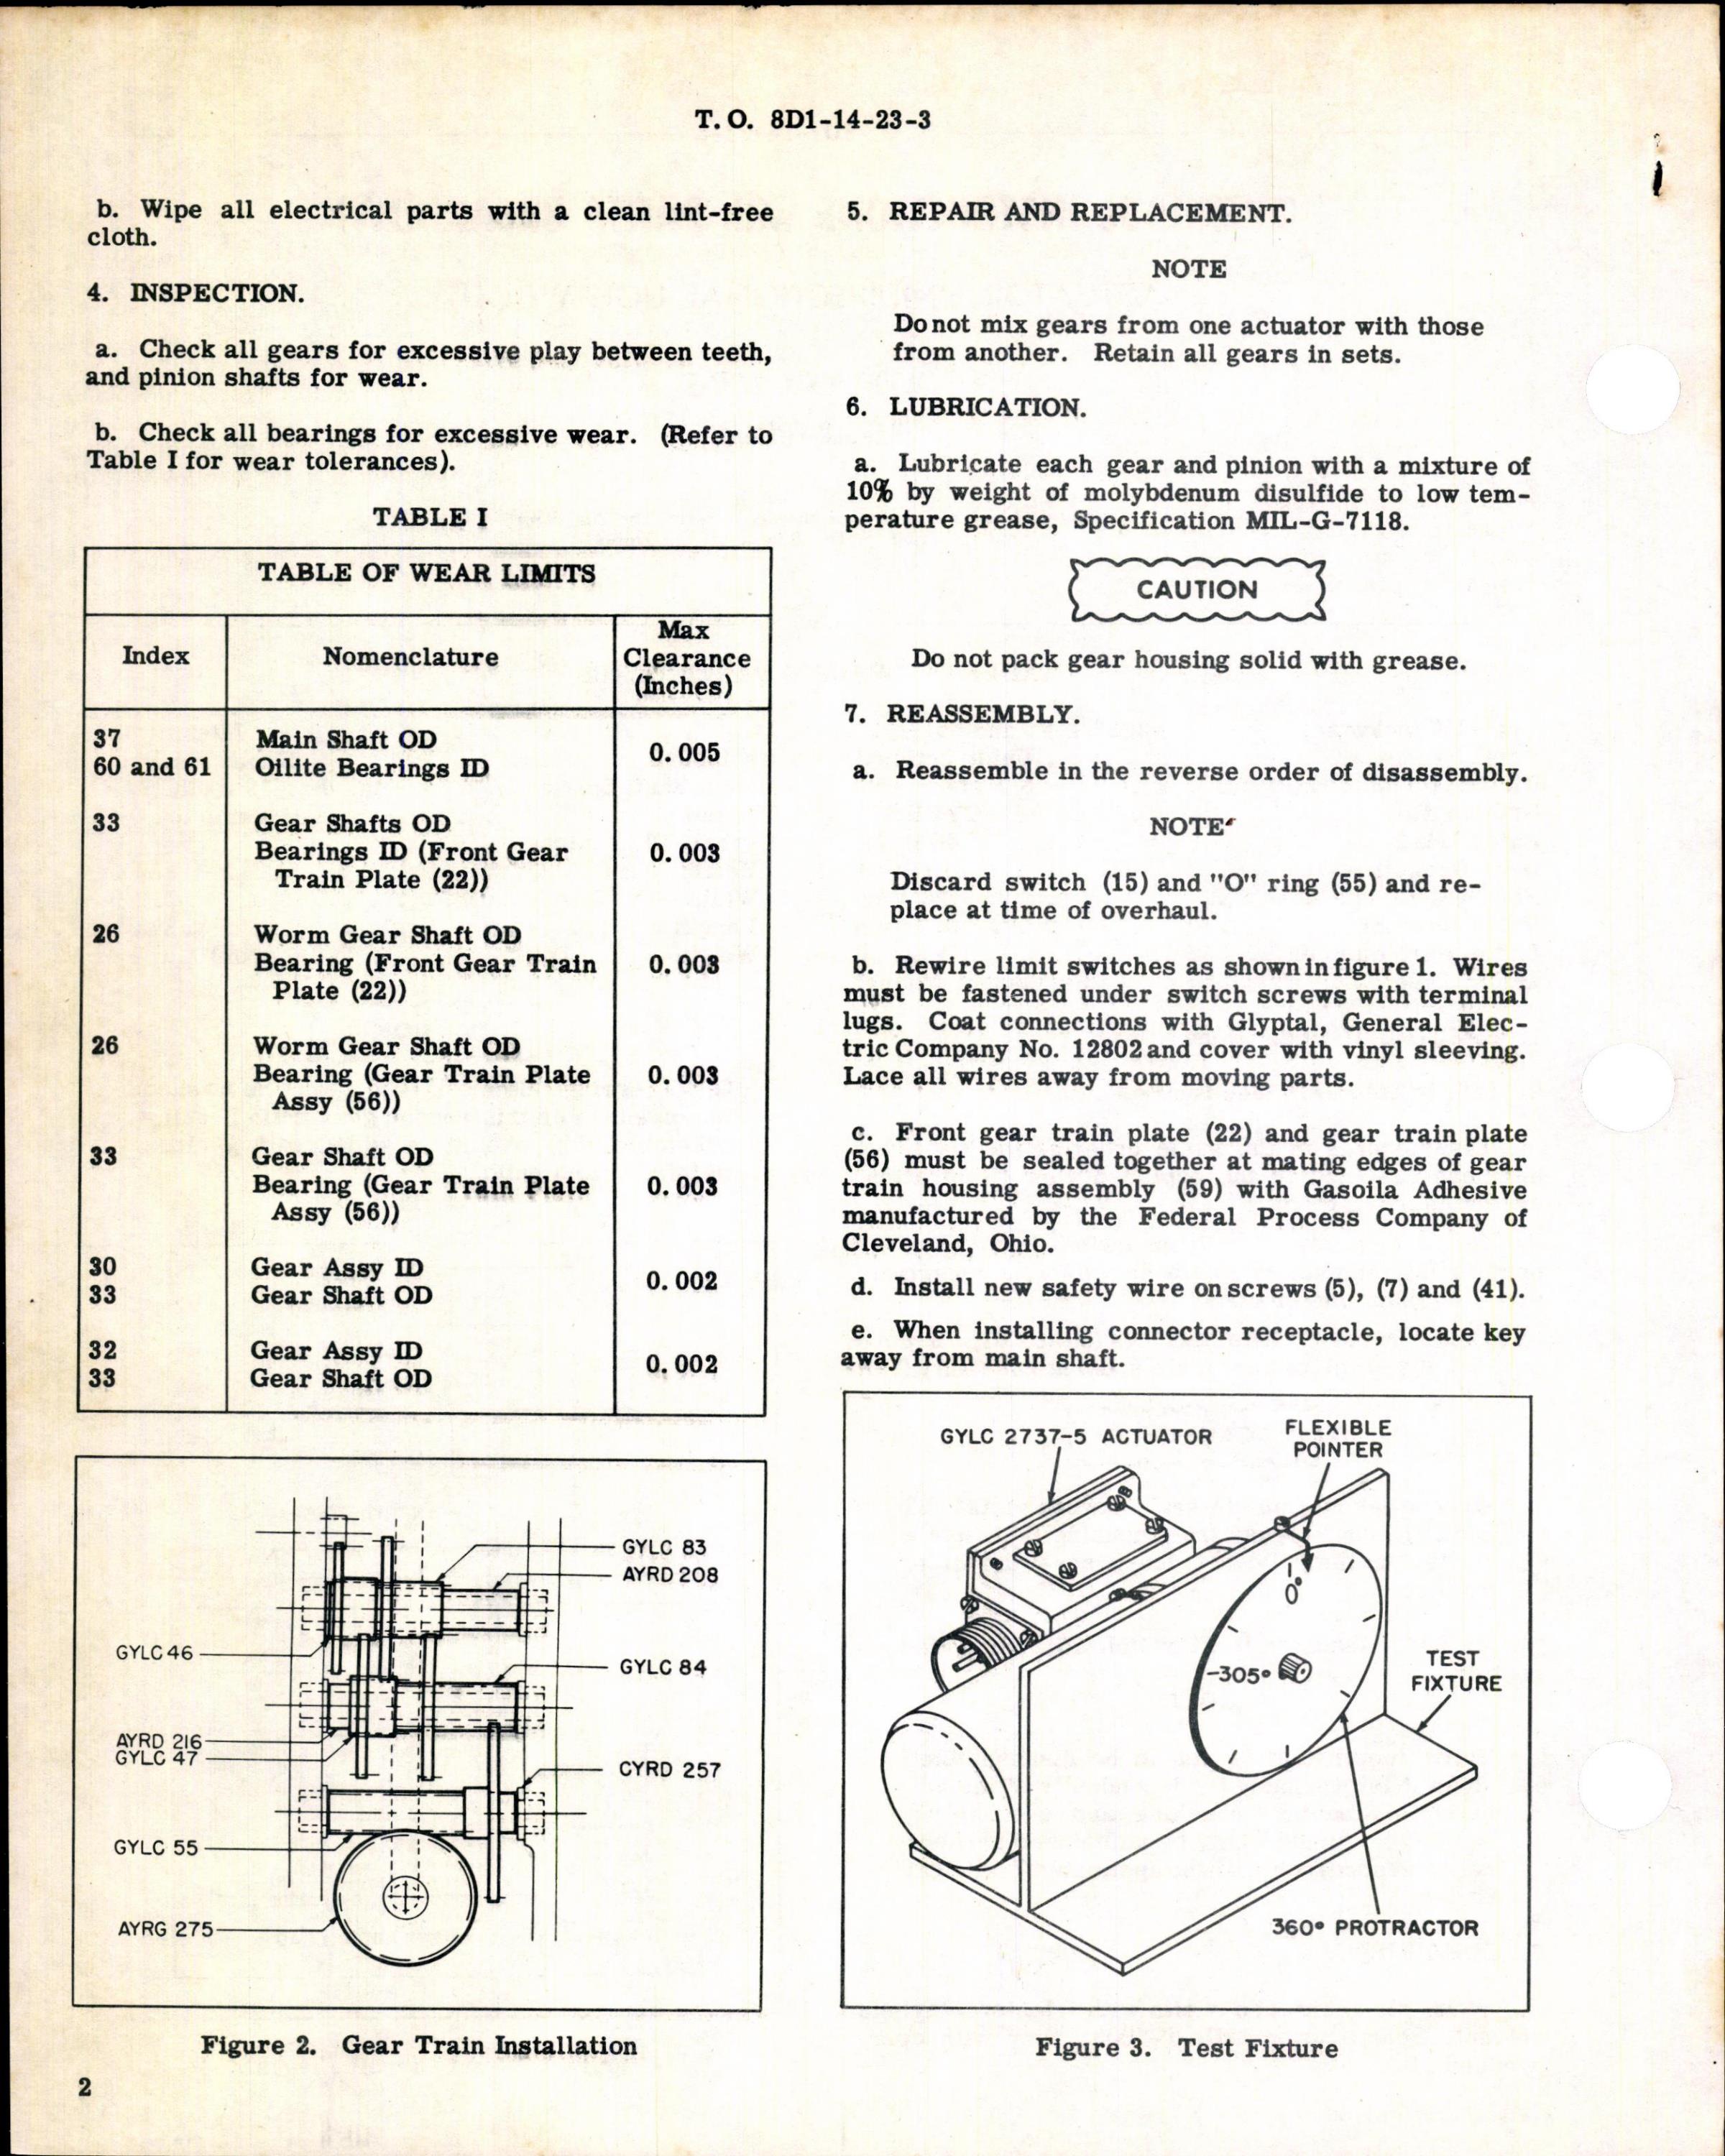 Sample page 2 from AirCorps Library document: Instructions w Parts Breakdown for Actuator, Undirectional